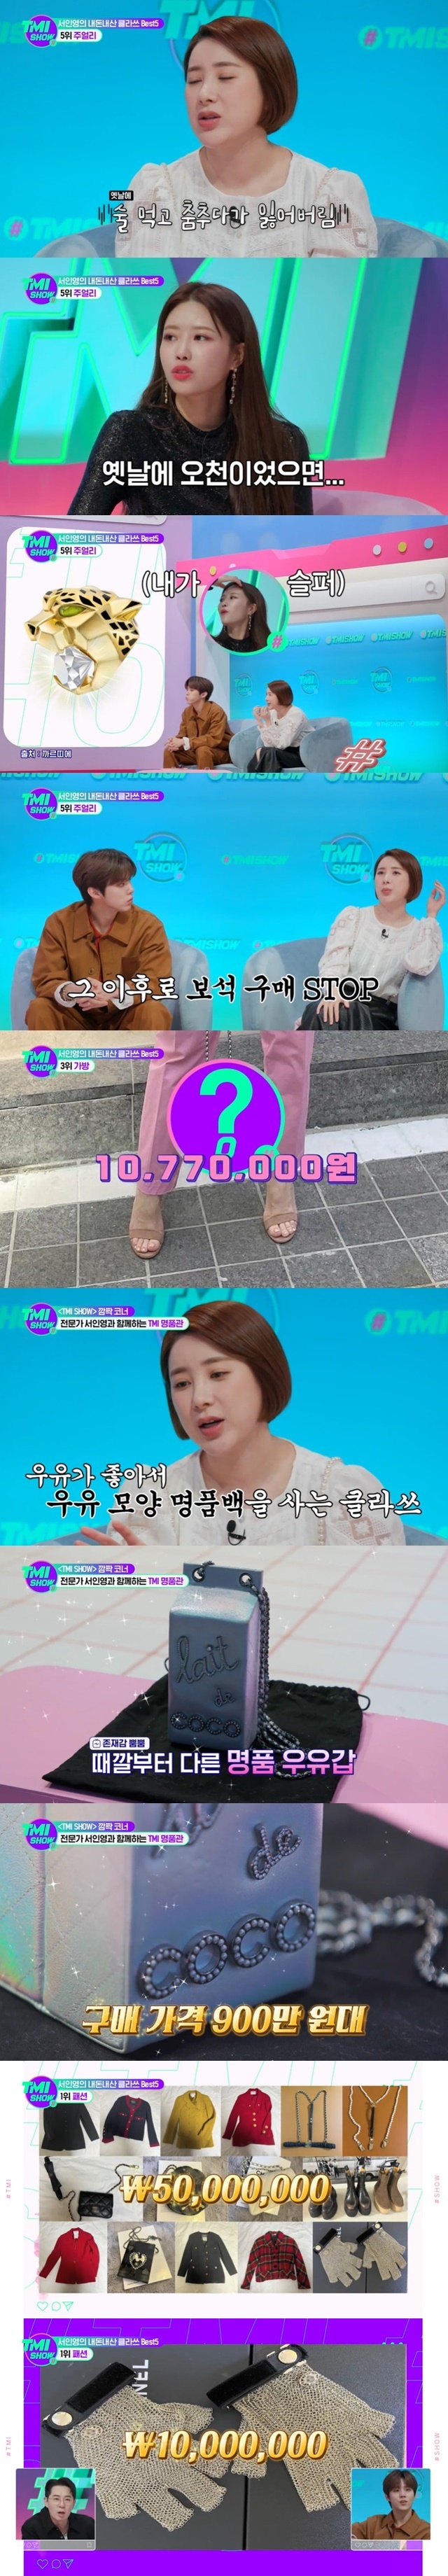 Seo In-young has unveiled a unique Nadonnaesan Clath.On Mnet TMI SHOW broadcast on April 27, singer Seo In-young released the 5th ranking of Nadon Nasan Klath BEST.On the same day, Seo In-young said, I do not get much sponsorship. I have never worn sponsorship shoes before releasing the top five of my best.Ive never been proud of my money.Seo In-youngs fifth place in the list is jewelry. Seo In-young likes jewelry so that they wear couple earrings with Ko So Young and Miranda Kerr.The most plex jewelery of them is 50 million won earrings.I wanted to listen and dance, and I lost it. It was the most expensive mountain, but it was only one side. It was fifty million won.Ive got one side of it somewhere, but its gone, he said. C. Im biting diamonds. I havent been a jewel since.Im so upset, he said.Seo In-youngs fourth-ranked dog product in the country.Seo In-young says that he puts his dog Macaroon, pudding, and love in 300,000 won padding from Germany. It is better to buy expensive things and put them on for a long time.Because I dont buy a lot of clothes, I keep buying a lot of cute things inside.Seo In-young also showed a certain taste, saying, The fortress also has a 1 million won pet padding, but 300,000 won is lighter and better.Seo In-youngs dog three Phoenix Maries monthly meal cost 1 million won.I always boiled it and fed it, and the kids were full of energy, said Seo In-young, who said, and the basic food they feed a month is 30 to 400,000 won.Its three Phoenix Marie, so its a million won, he explained.The third place in the bag is the bag. The Seo In-young has released a bag from C company that everyone around him has dried up when he buys it. I do not regret it so far.I like milk, but I liked it because it was a milk bag. The milk bag-shaped luxury bag was purchased for 9 million won and is currently 10,770,000 won.Seo In-young said, The Classic has been very expensive, he said.Seo In-youngs second place in the Nadonnaesan is interior accessories.Seo In-young said that he was allergic to wearing six pajamas a month, so he wore good pajamas. He also released 4 million won J desk and 1 million won cans of US company.When the Americas asked, Is not it a waste to turn on if the cans are expensive? Seo In-young added, I am turning on anyway.The top spot in the money-making of Seo In-young is fashion.Seo In-young confessed that he spent 50 million won on luxury vintage fashion, saying that it was a little unfair to be insulted by the leading high-waist fashion.The C chain gloves purchased by Seo In-young were purchased for 10 million won for the music video, but they did not wear it because the hand size did not fit.